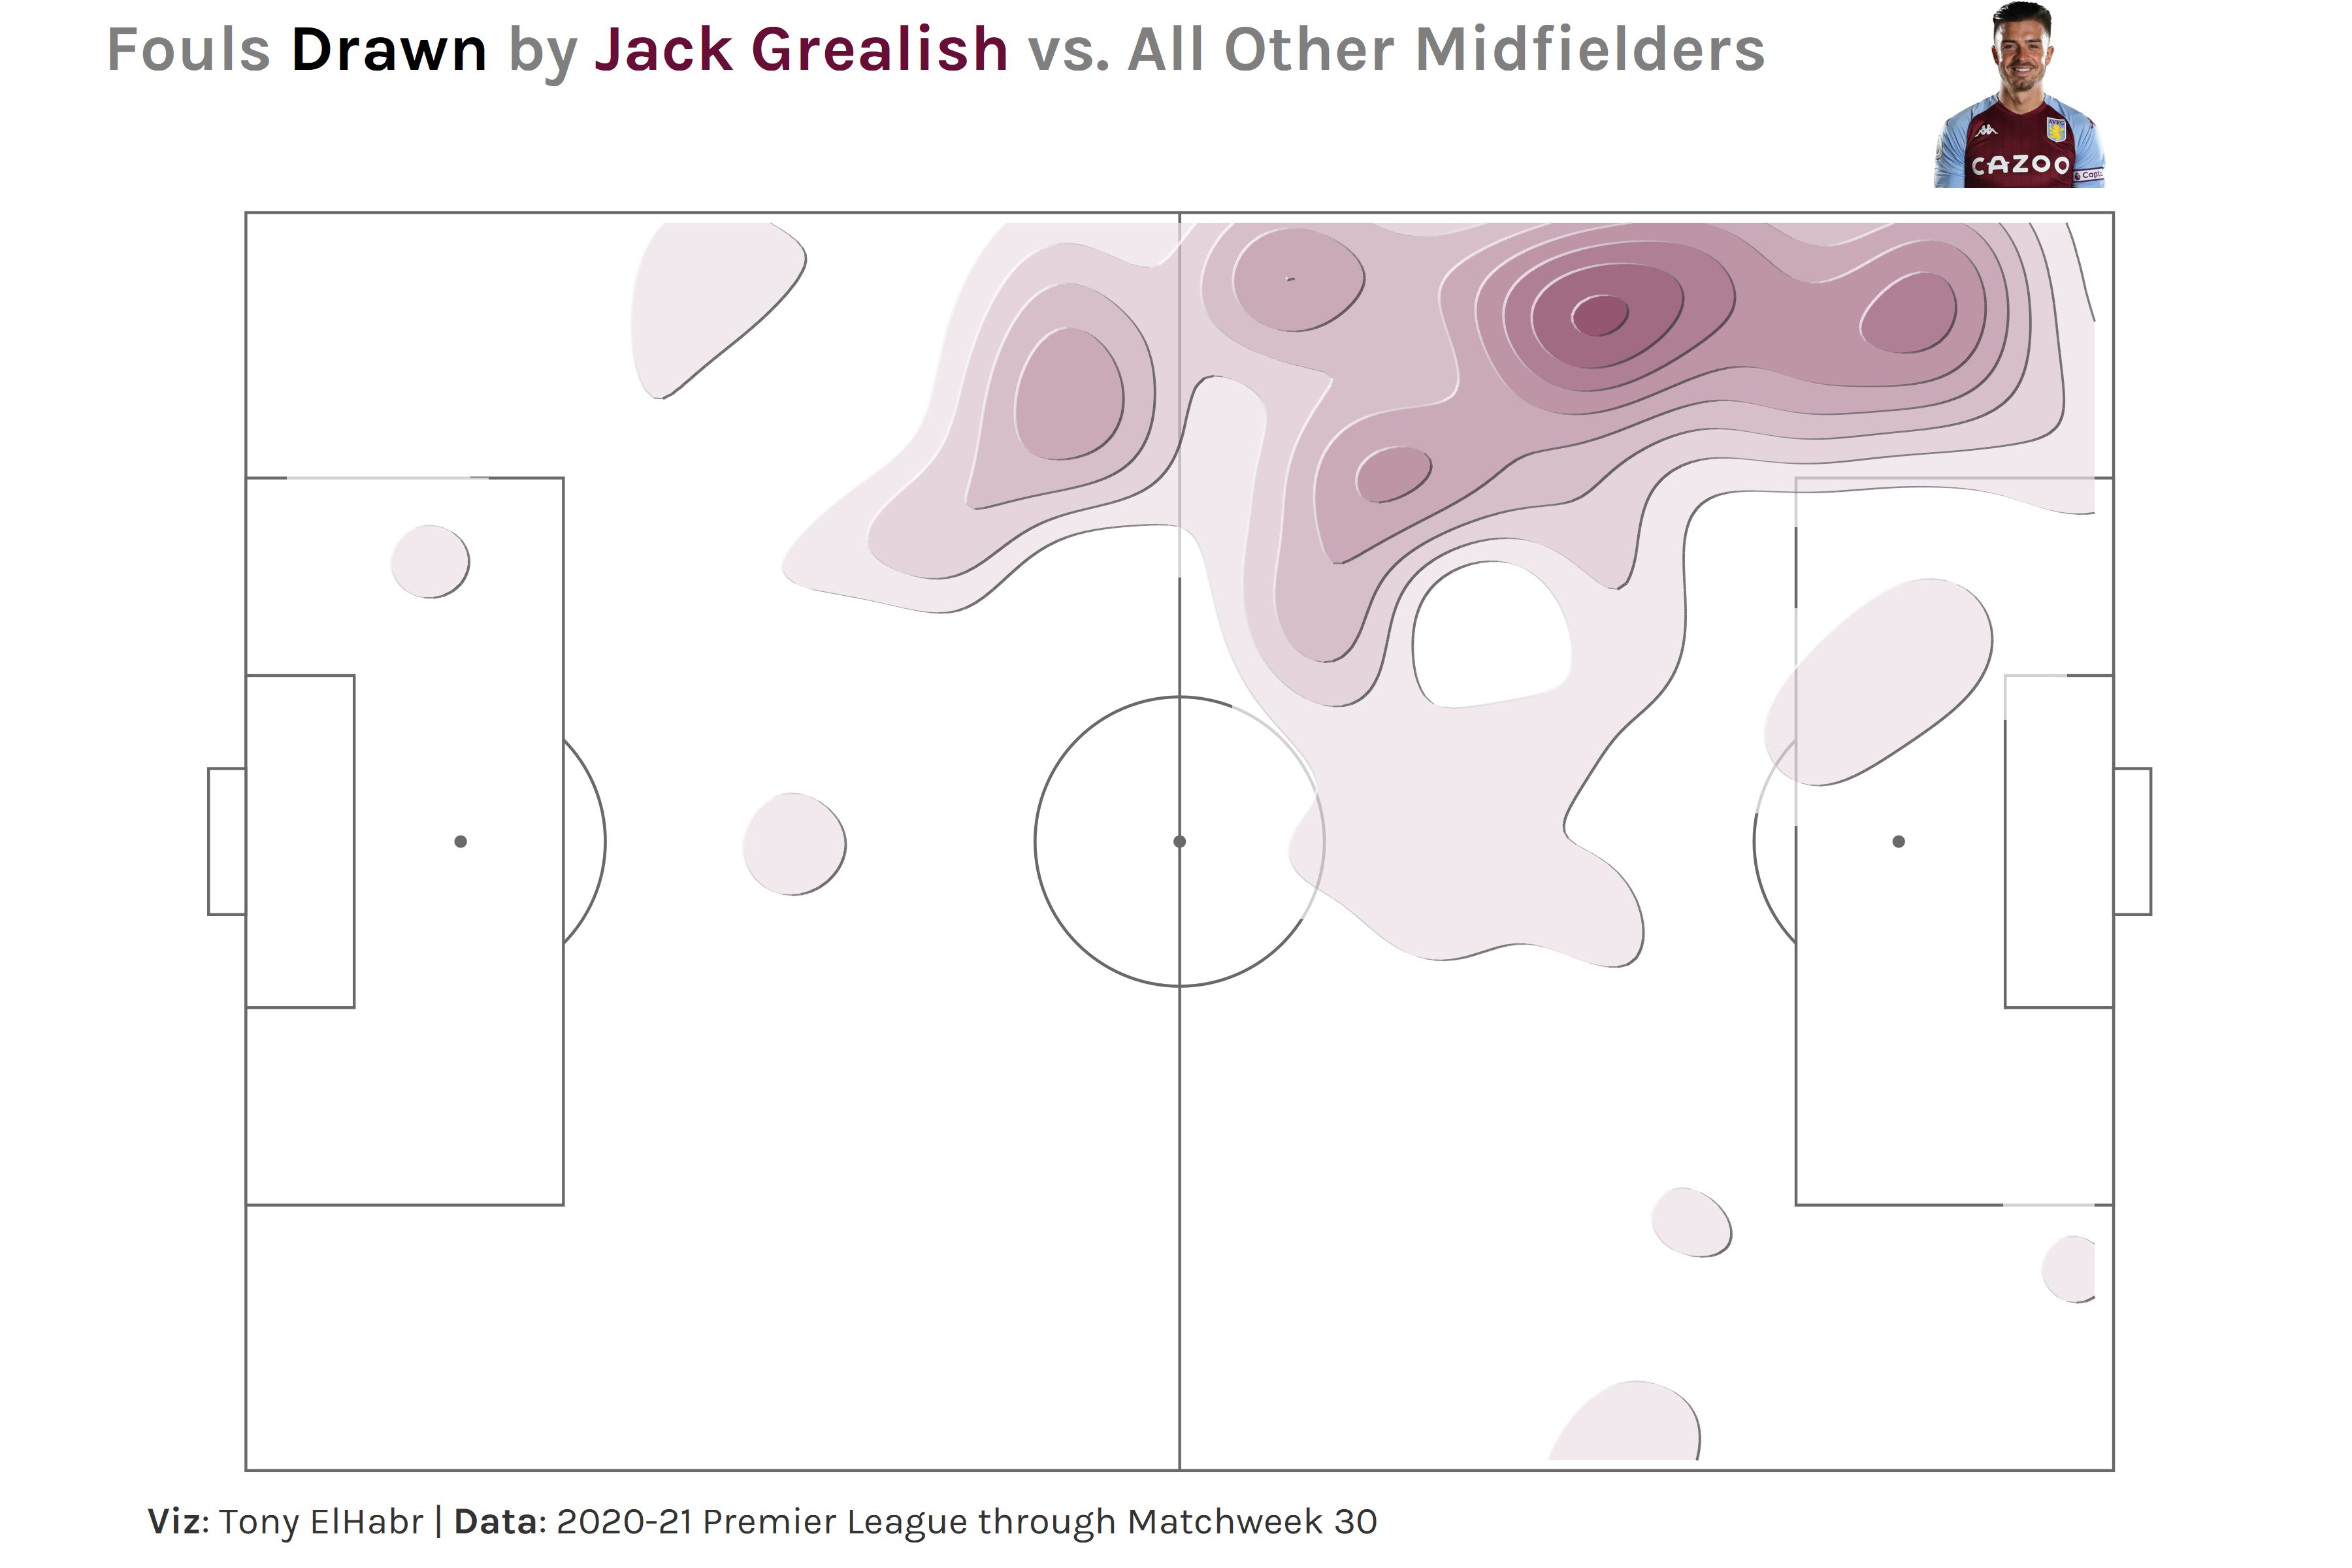 2020-21 EPL Fouls Drawn by Jack Grealish vs Other Midfielders Tanaka Map